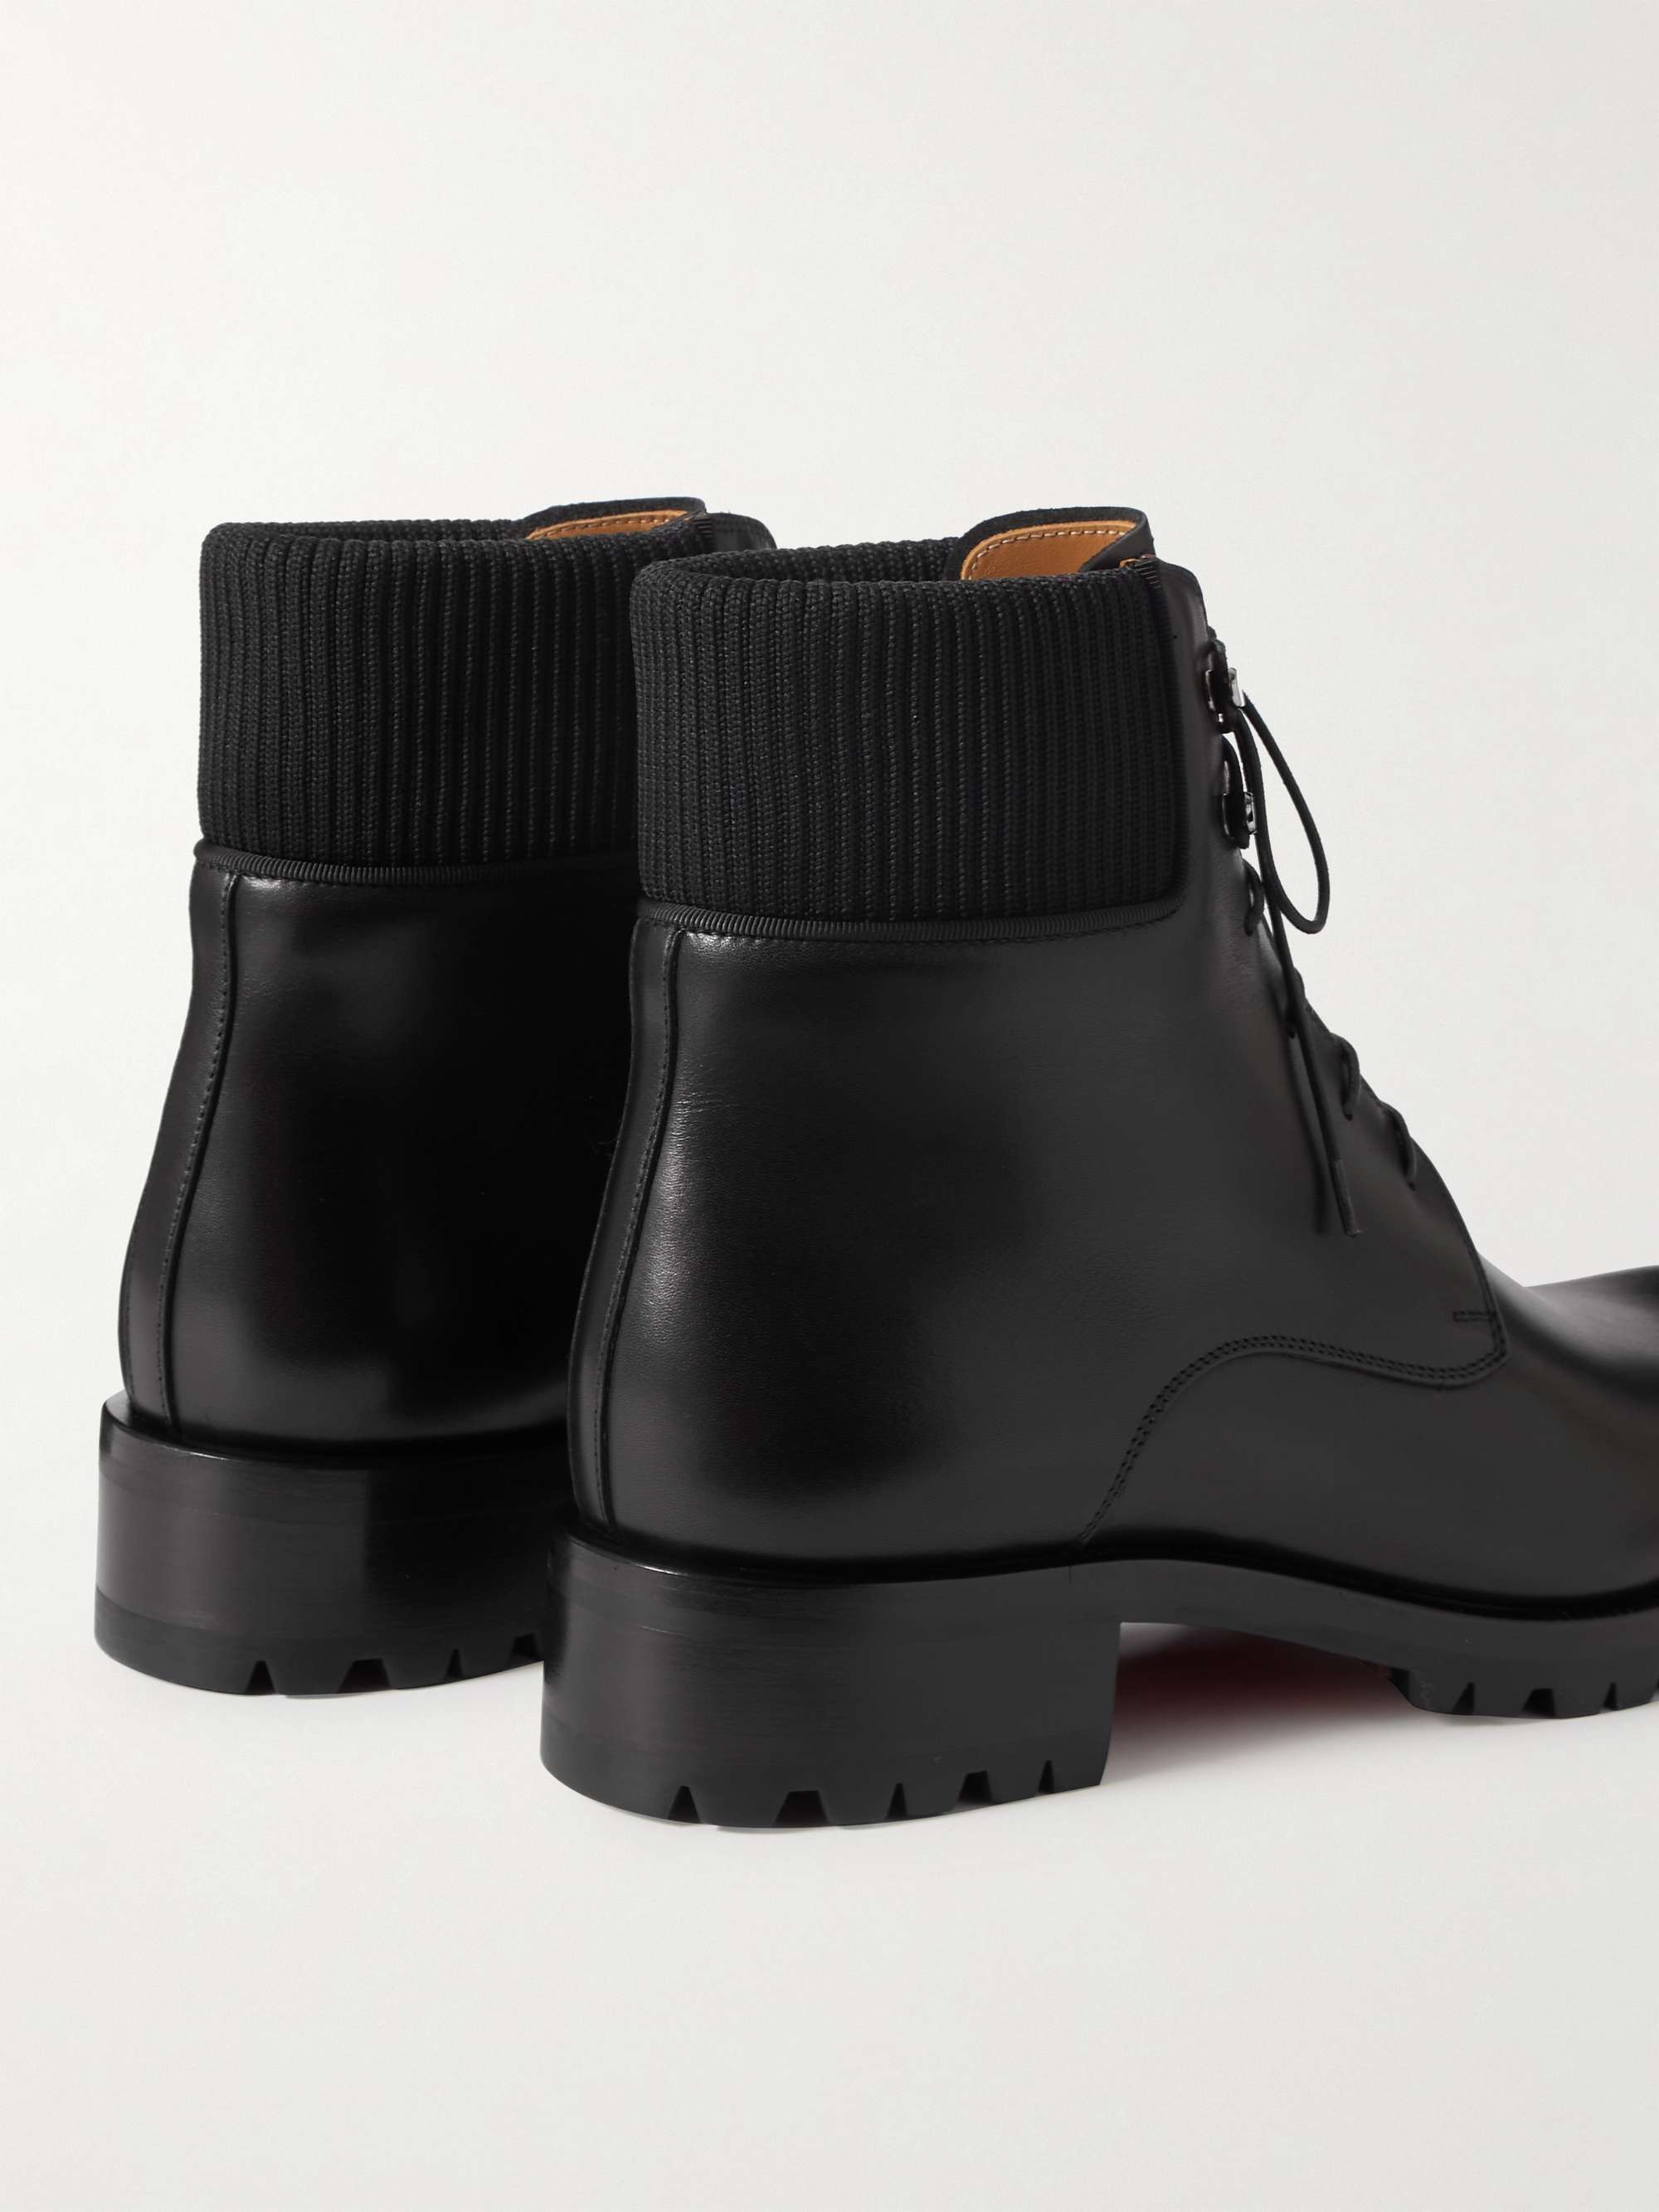 CHRISTIAN LOUBOUTIN Trapman Ribbed-Knit and Grosgrain-Trimmed Leather Boots